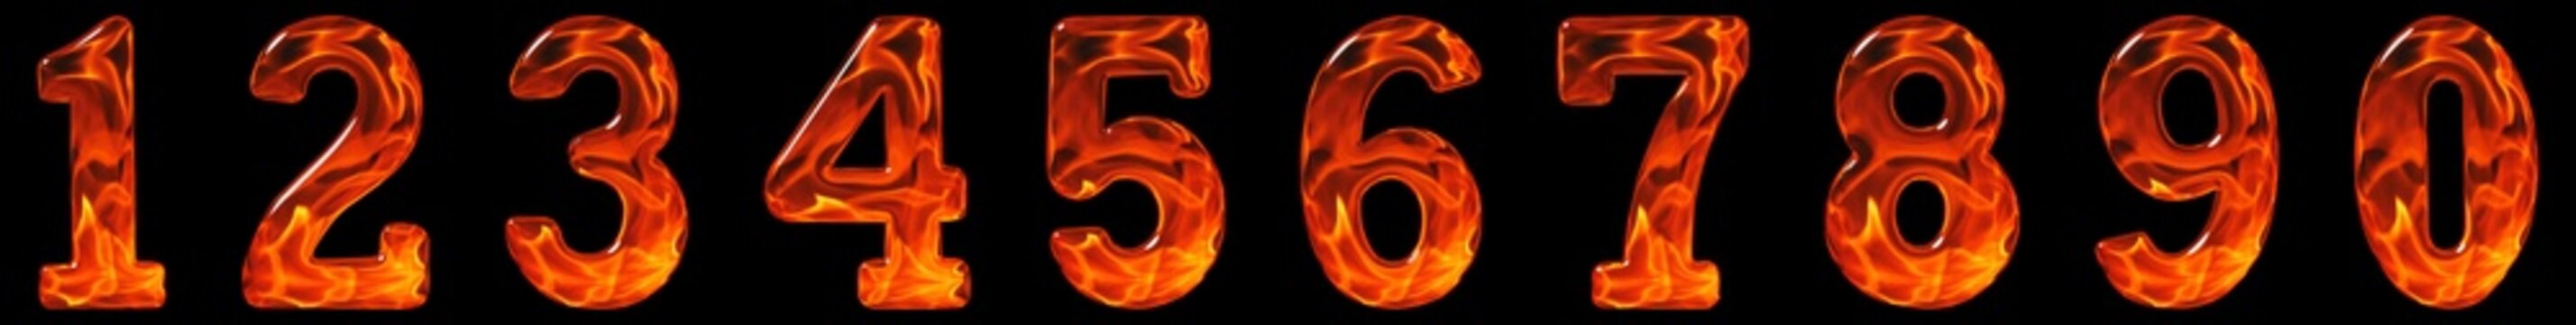 Set of arabic numbers, emitation flame texture, 3D illustration, isolated on black background